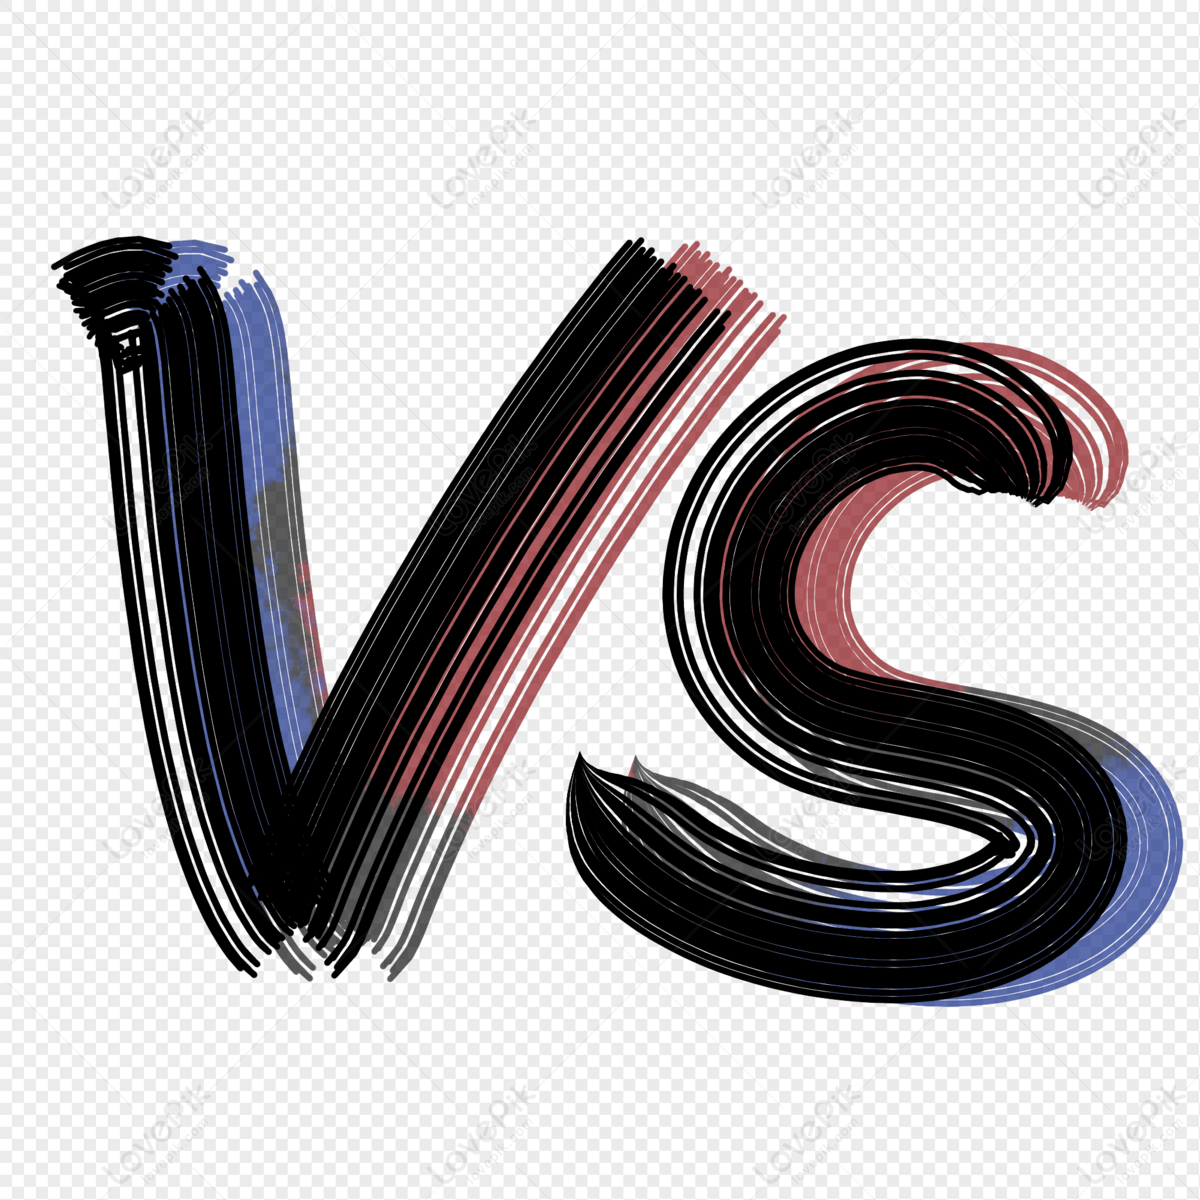 Vs PNG Picture And Clipart Image For Free Download - Lovepik | 401249585